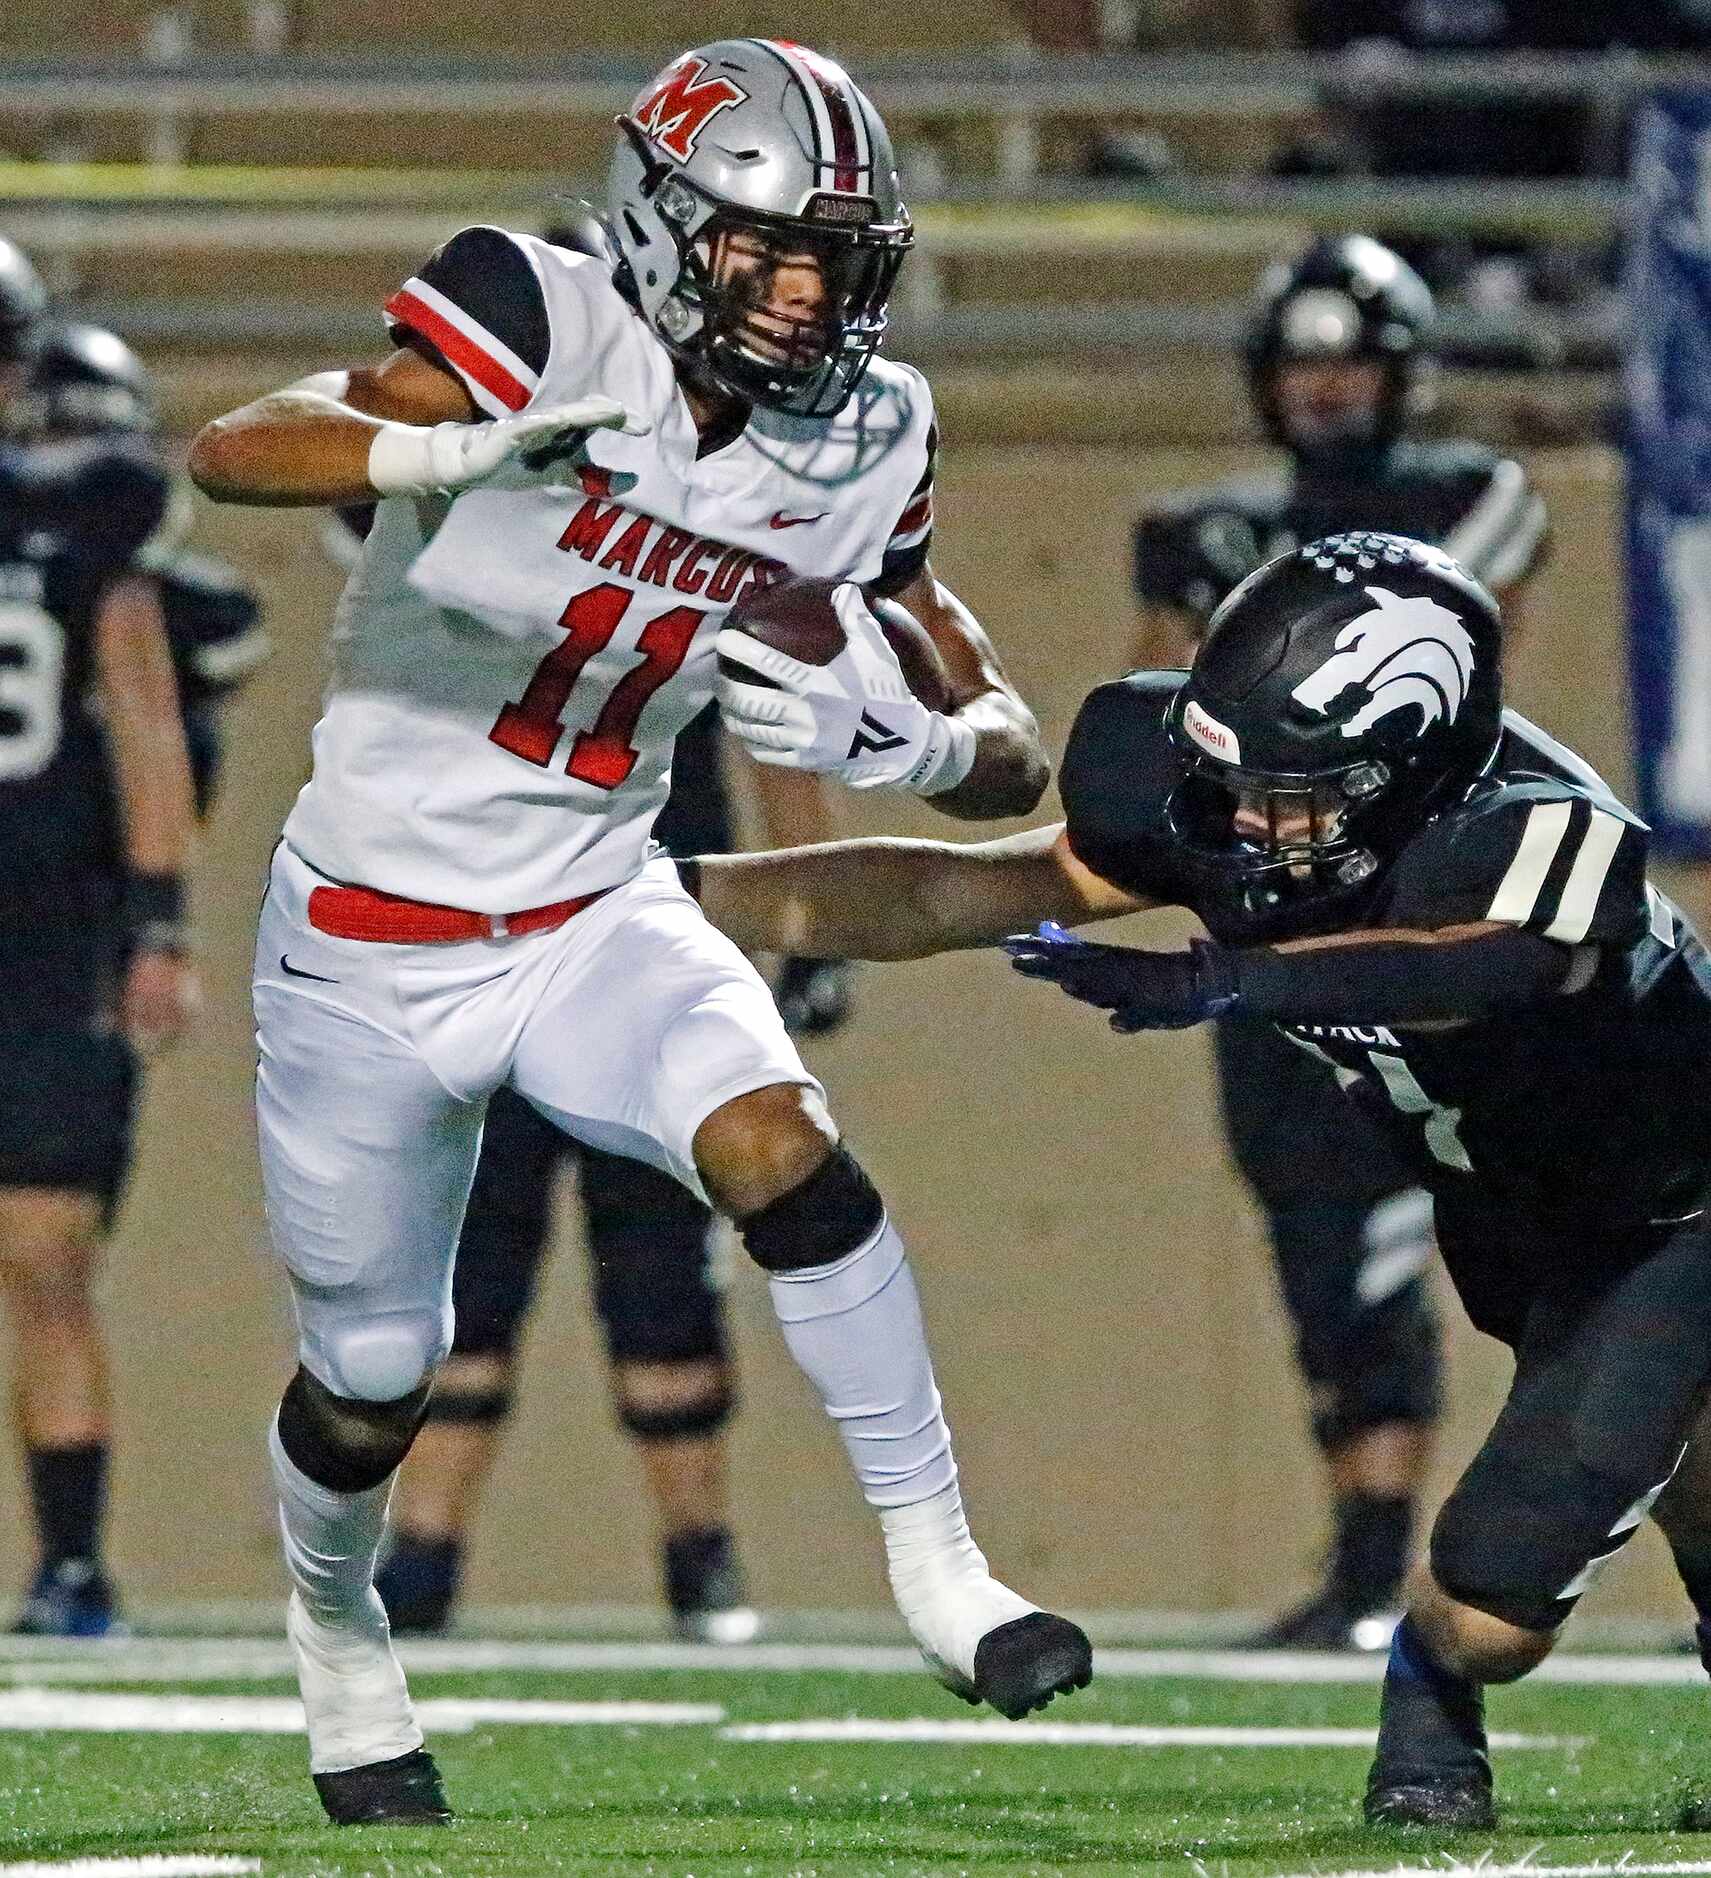 Flower Mound Marcus High School wide receiver Dallas Dudley (11) eludes tacklers for a...